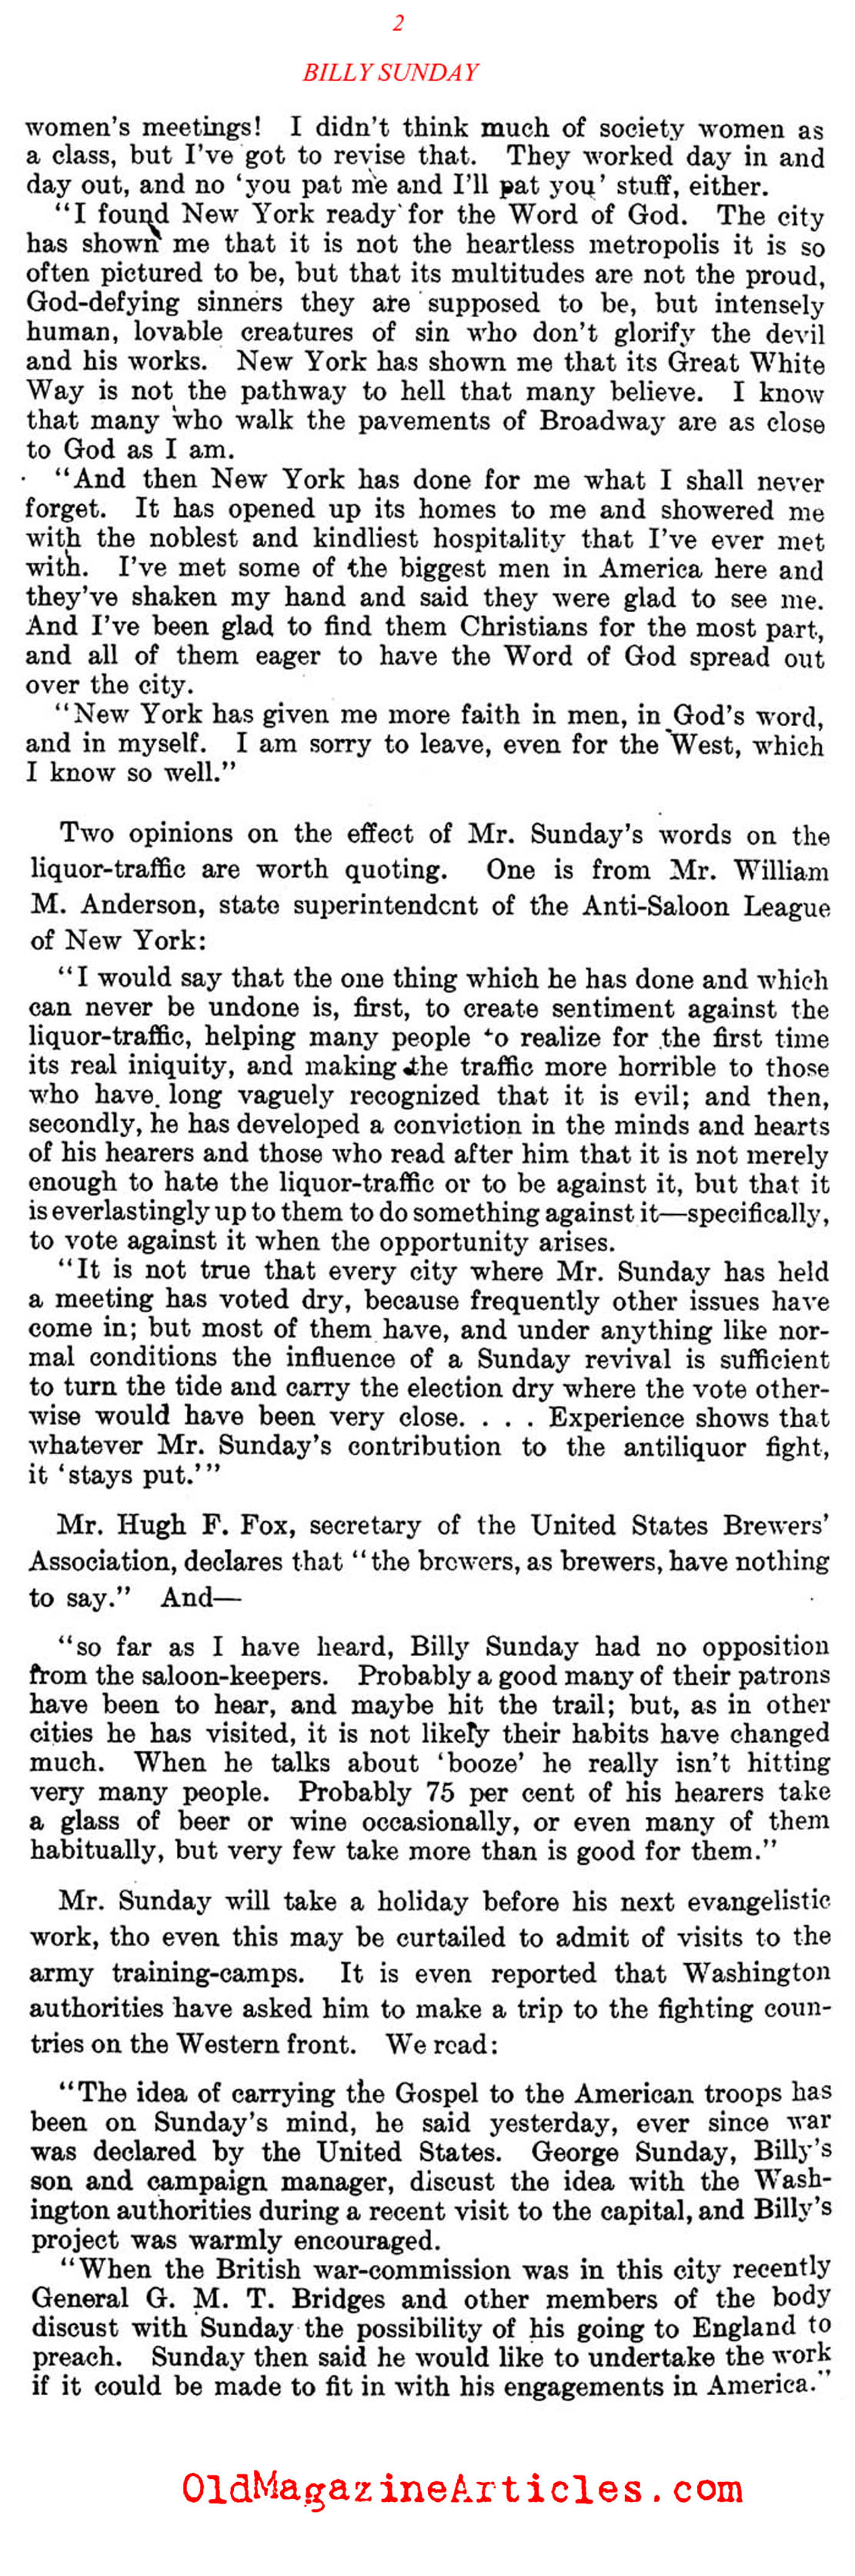 Billy Sunday Goes to New York City (The Literary Digest, 1917)